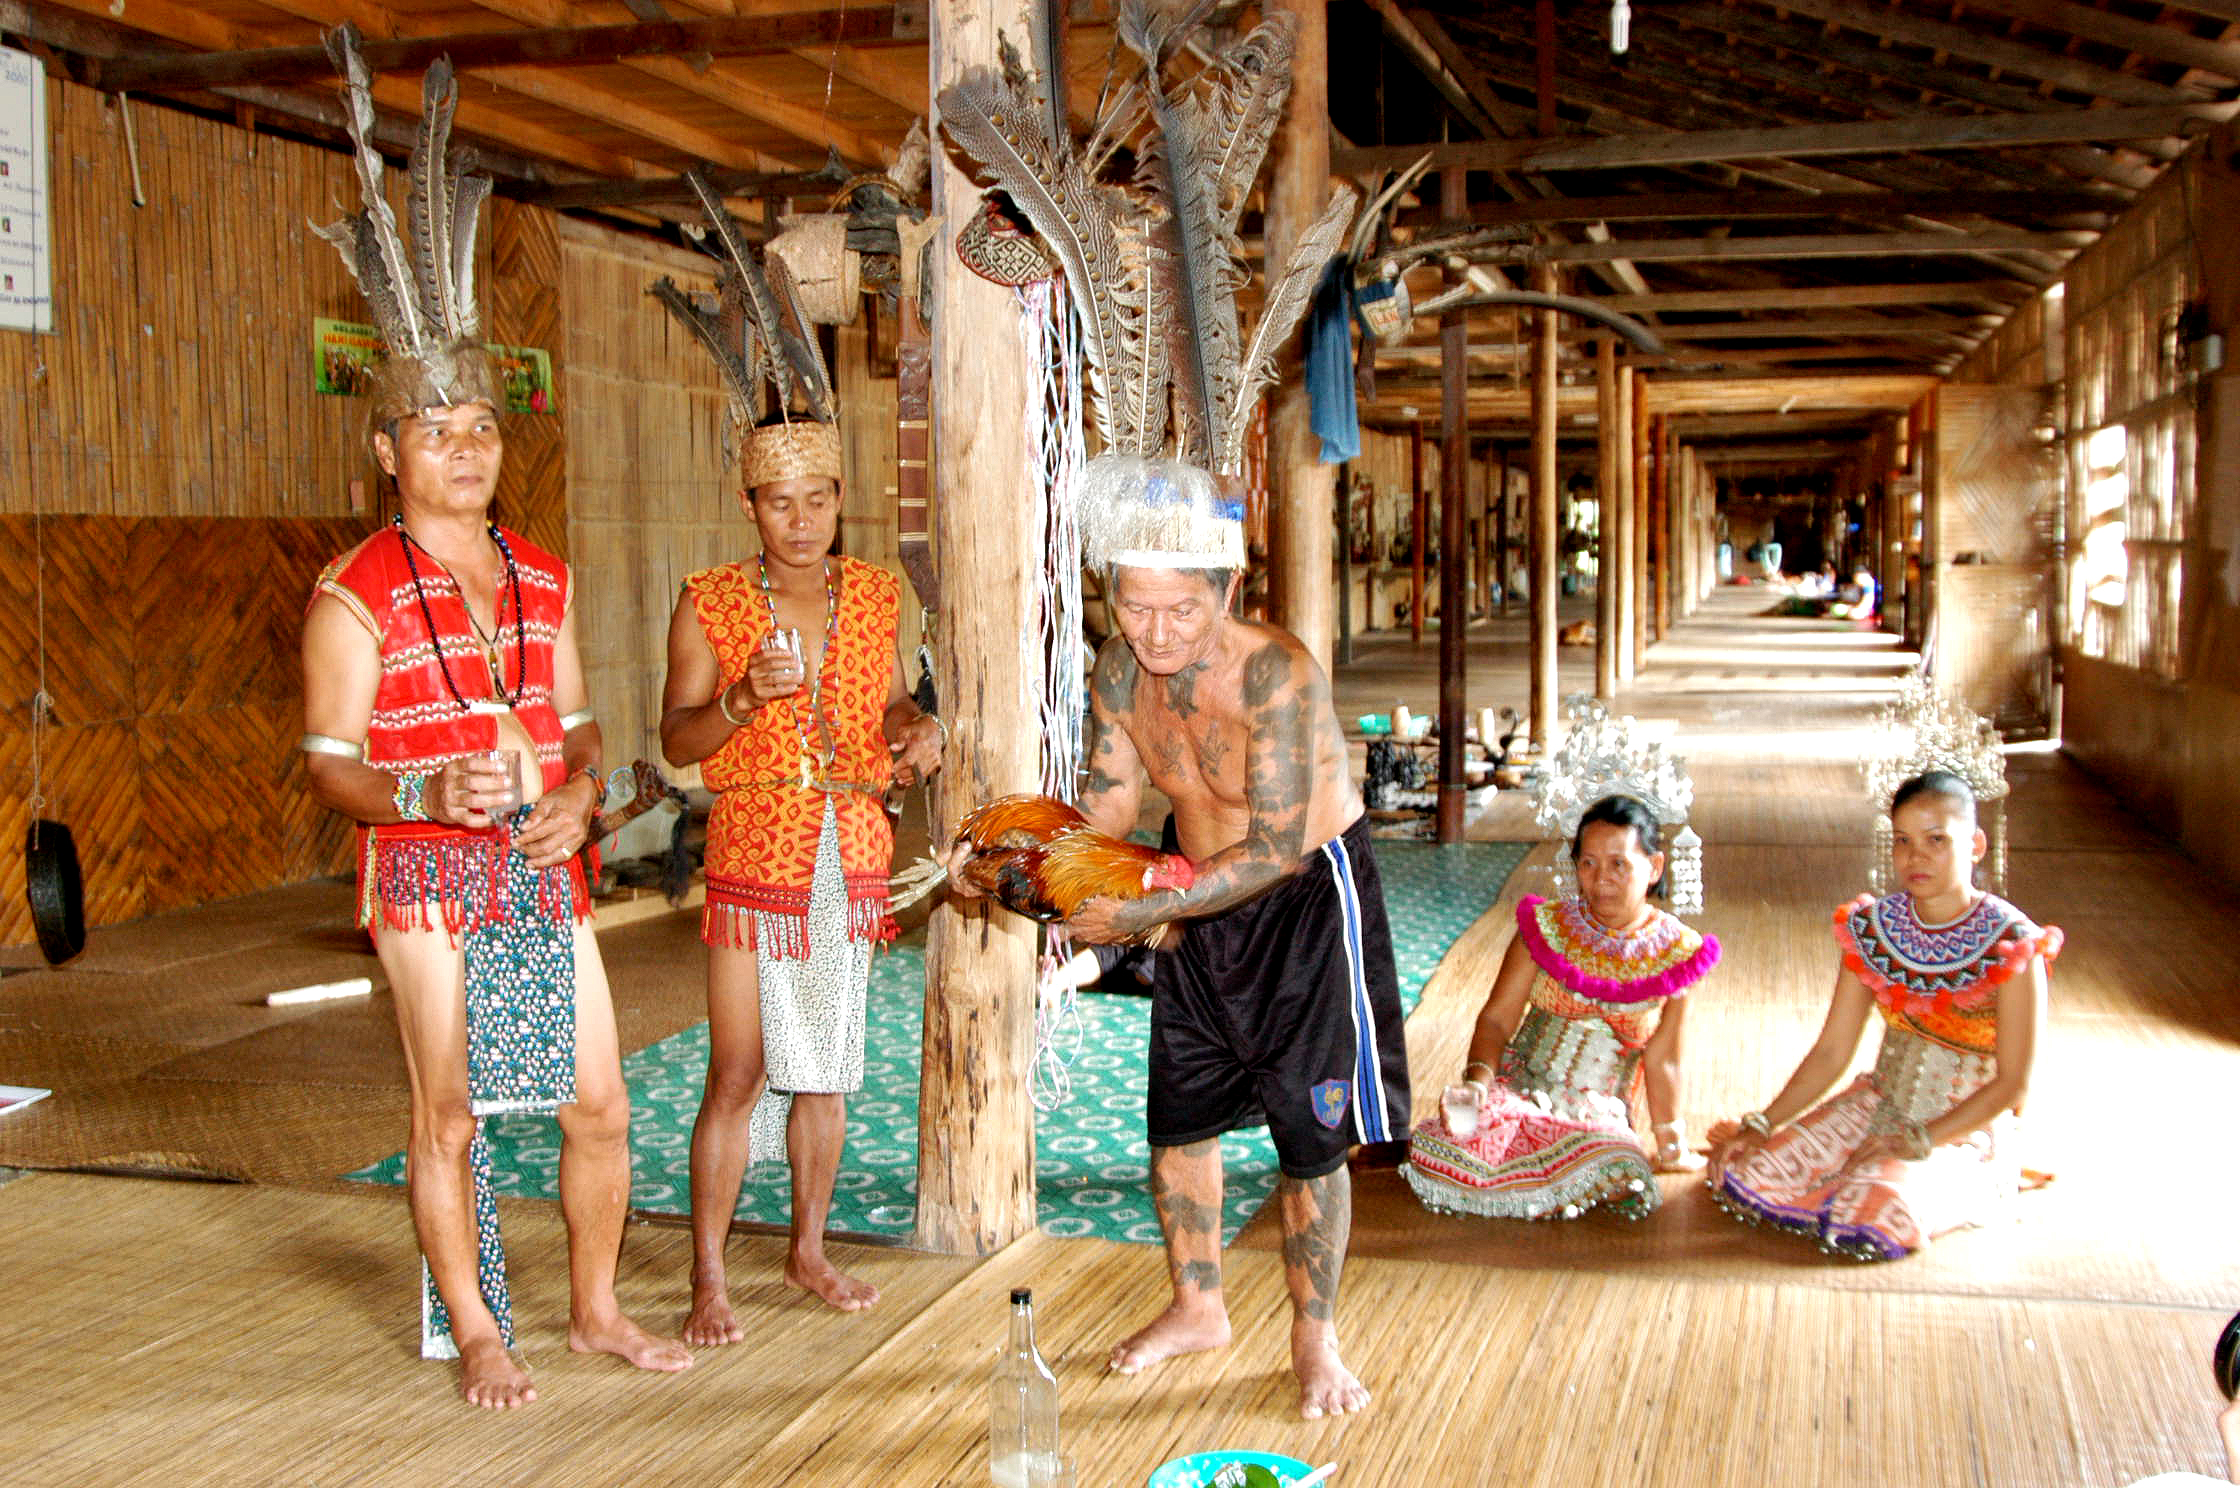 GAWAI DAYAK FESTIVAL - A TIME OF THANKSGIVING AND MERRYMAKING